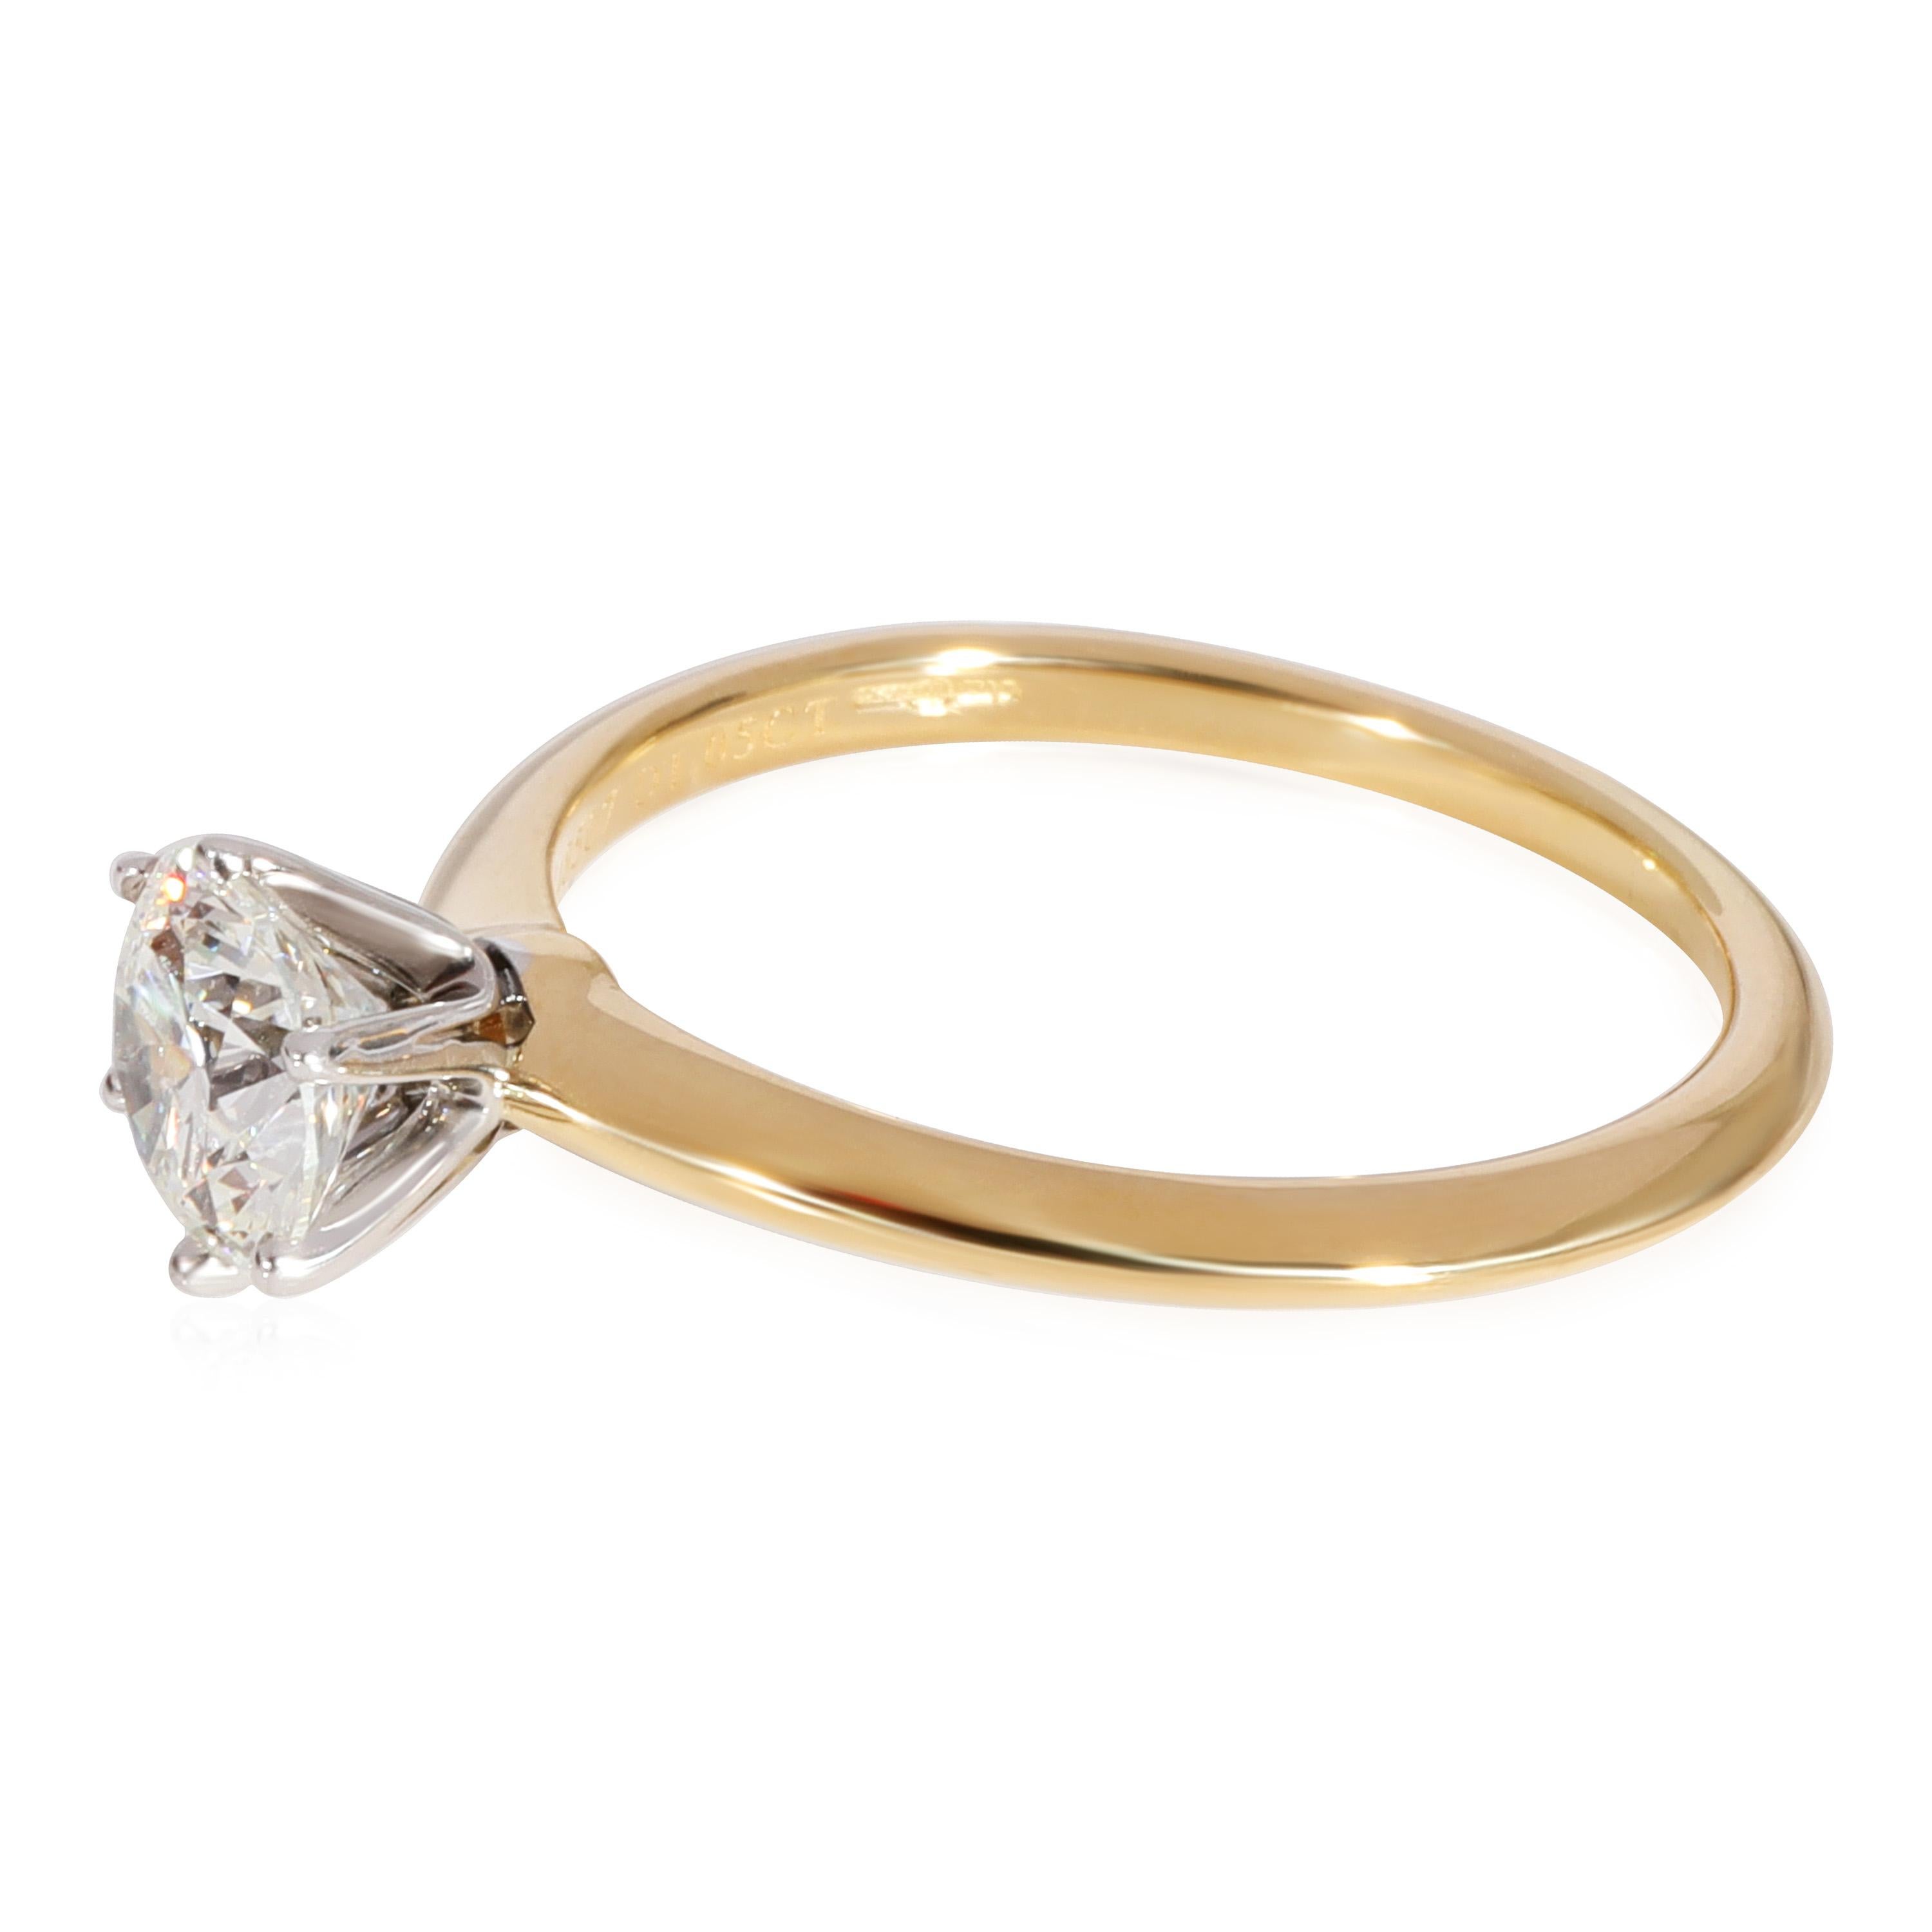 Round Cut Tiffany & Co. The Tiffany Solitaire Ring in 18K Yellow Gold/Plat 1.05 CTW